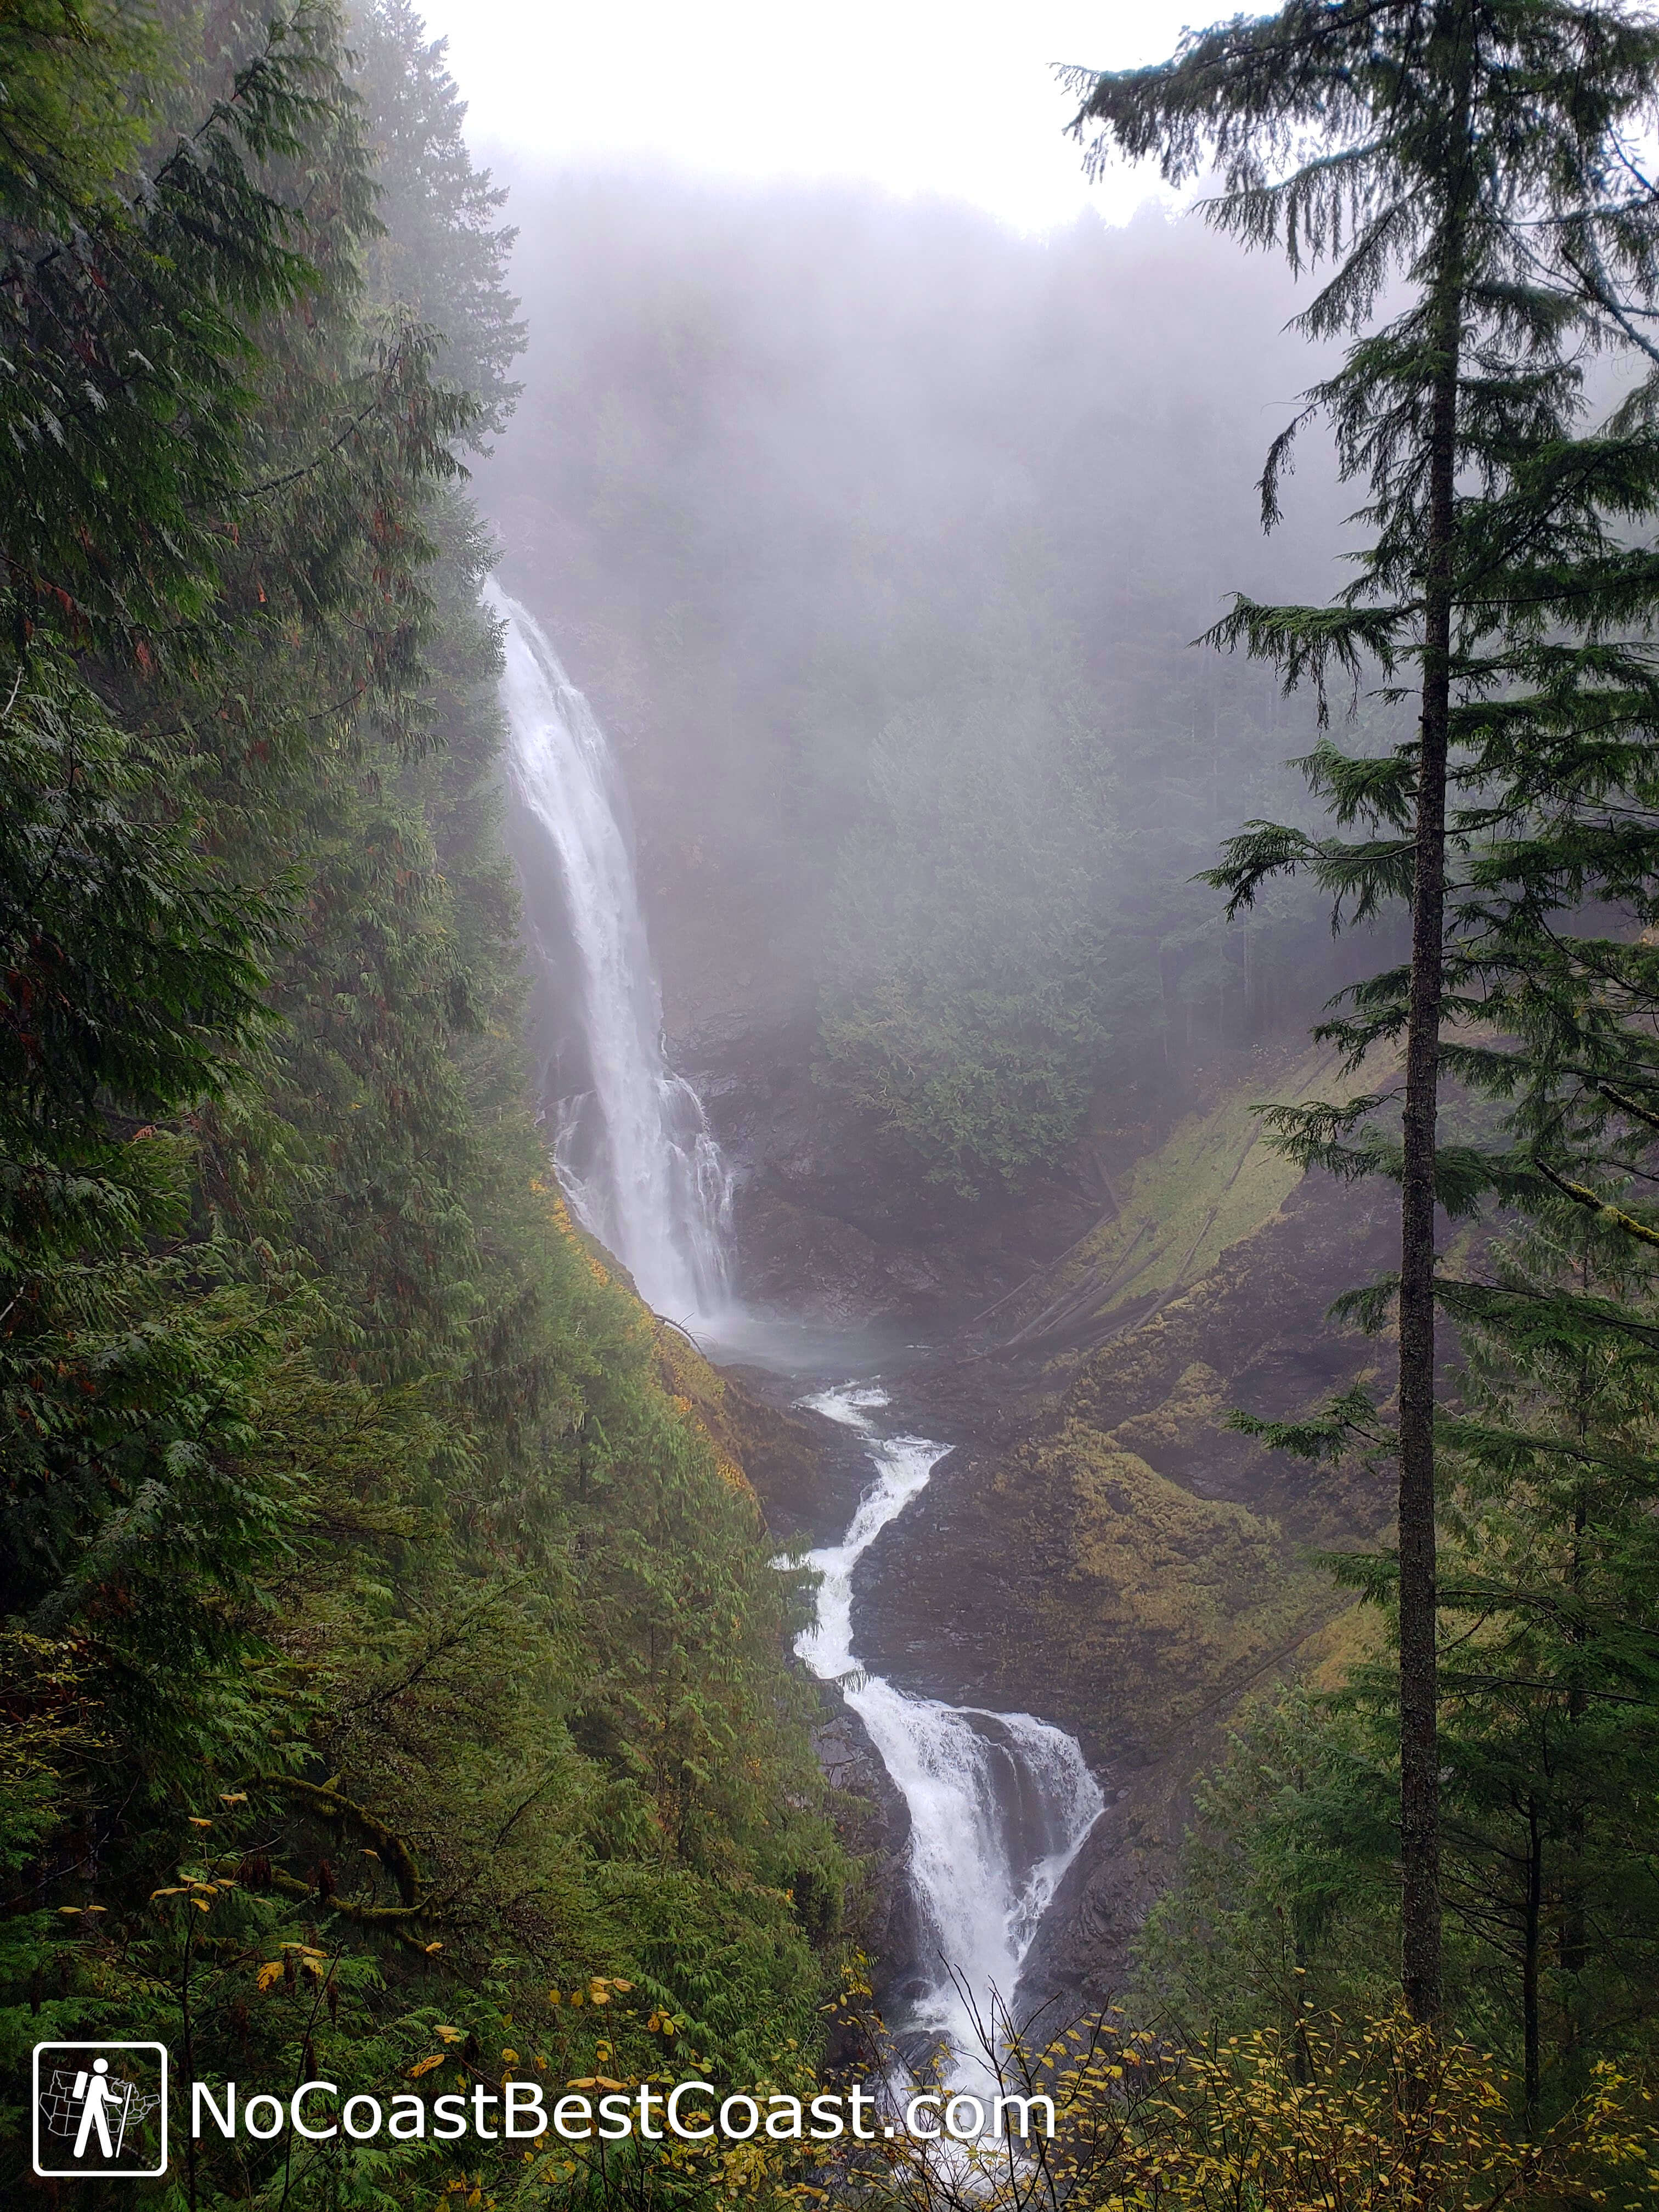 Middle Wallace Falls shrouded in mist and surrounded by moss